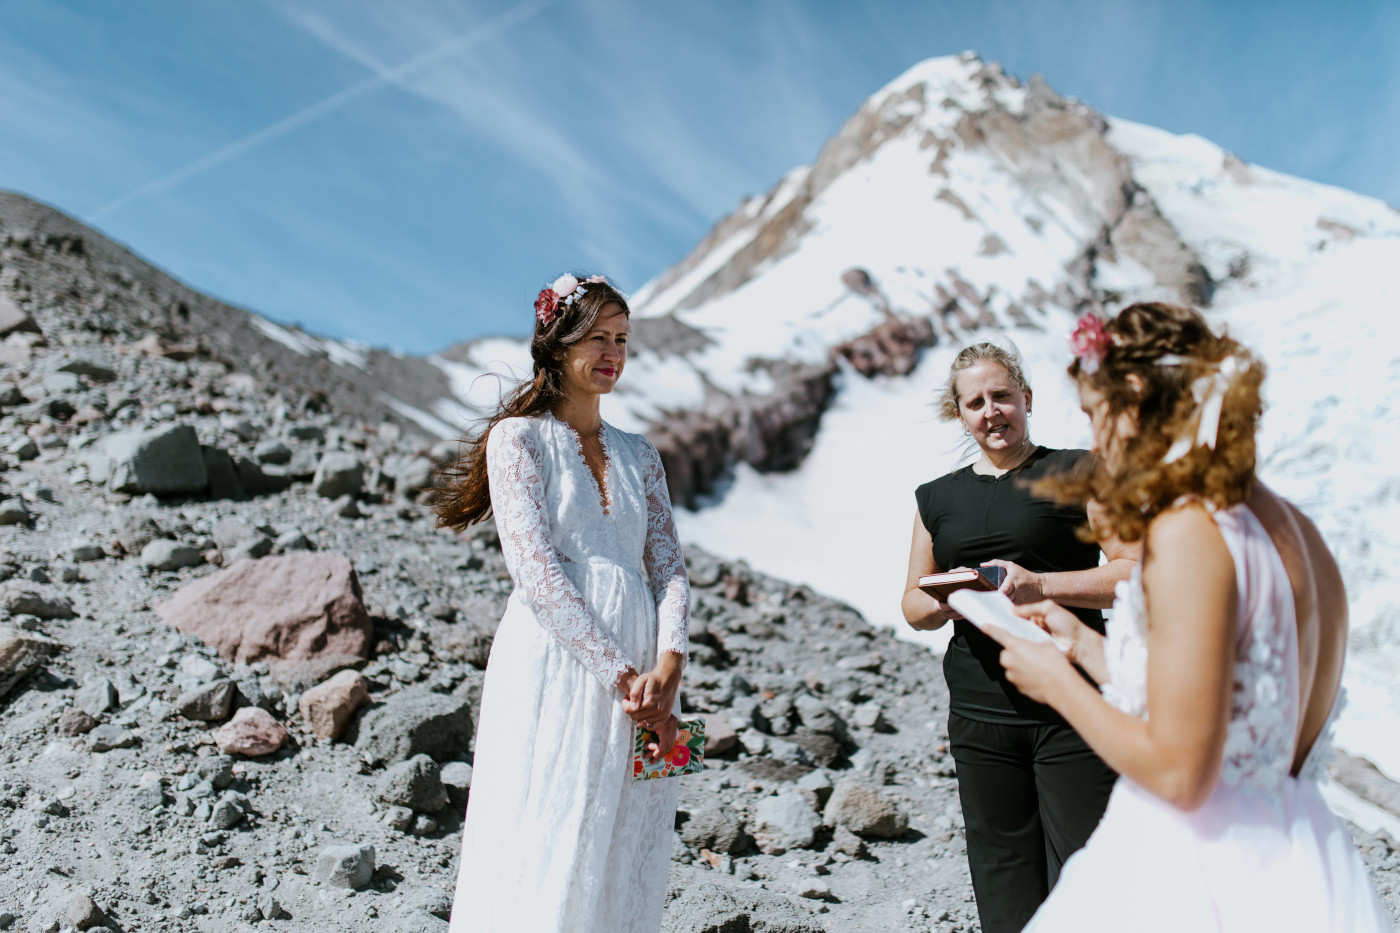 Margaux listens to Heather during their elopement. Elopement photography at Mount Hood by Sienna Plus Josh.